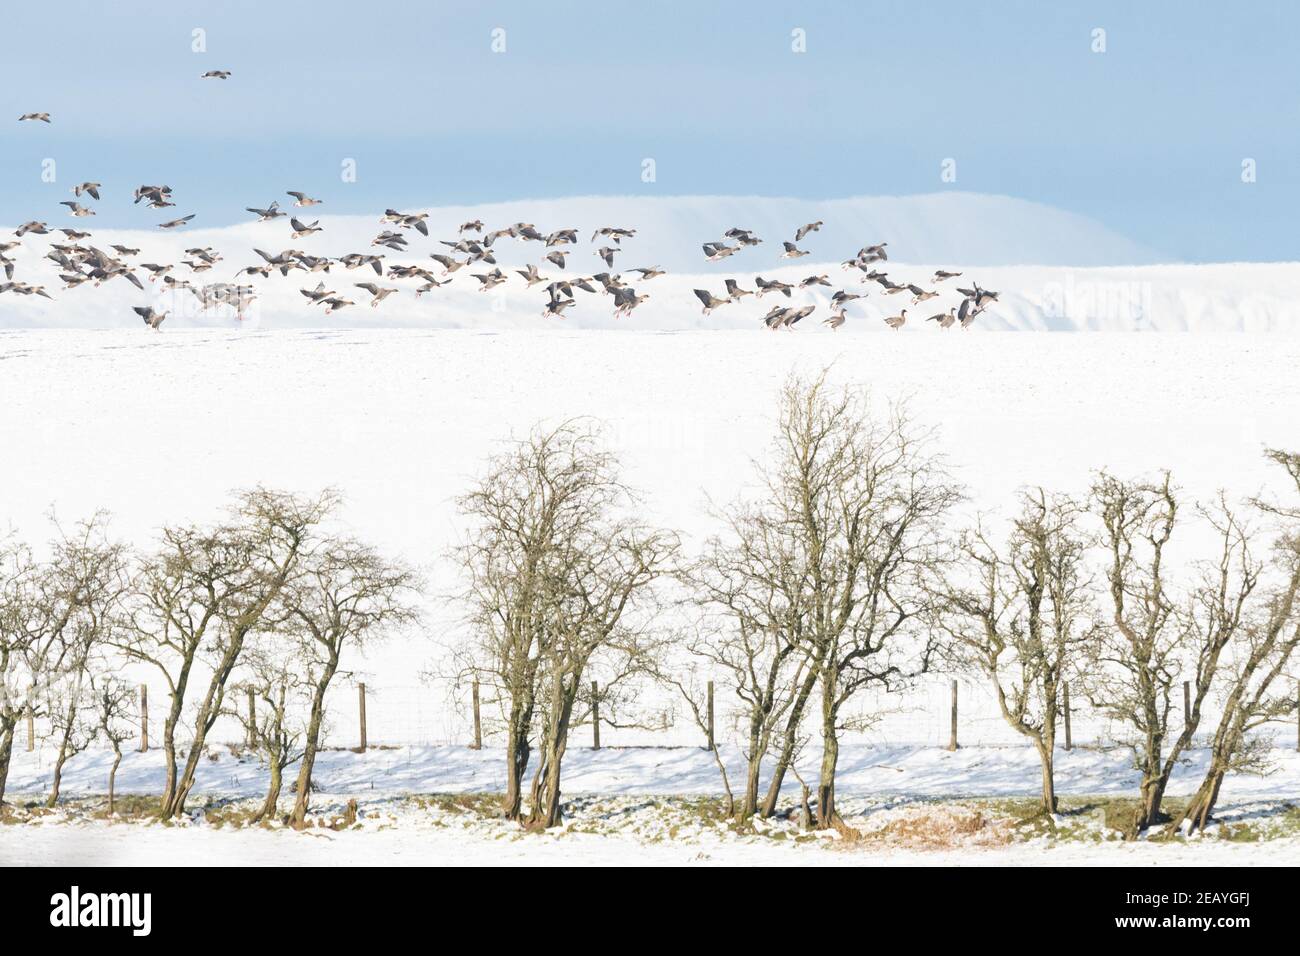 Killearn, Stirling, Scotland, UK. 11th Feb, 2021. UK weather - greylag geese landing on the brow of a snow covered field in Killearn Credit: Kay Roxby/Alamy Live News Stock Photo